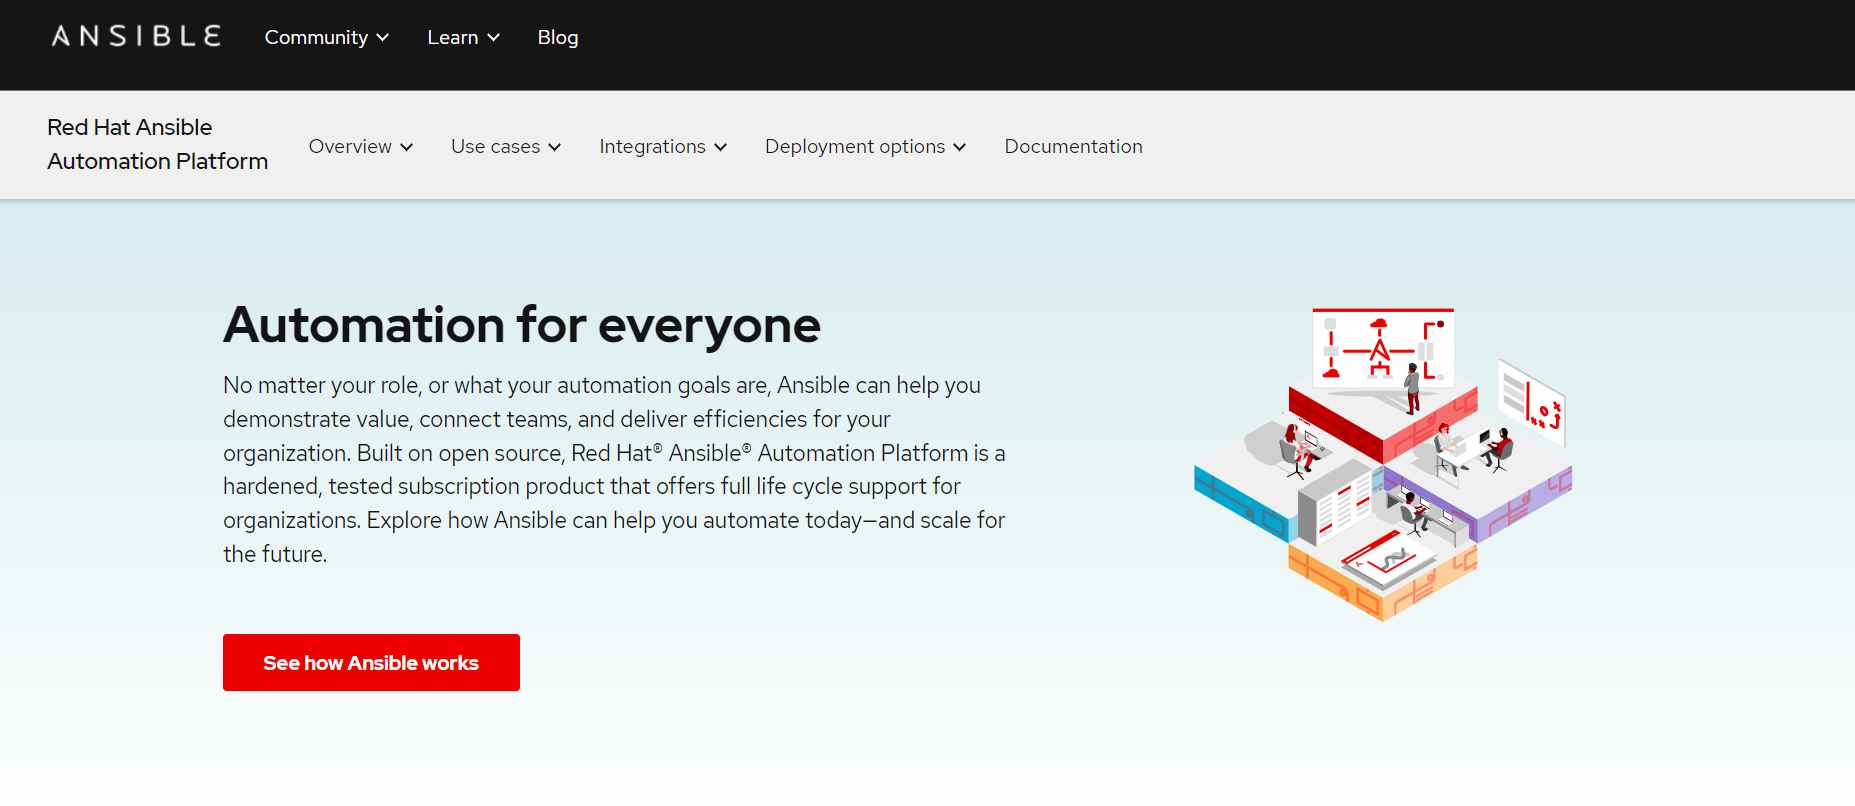 Feature image of Ansible automation tool